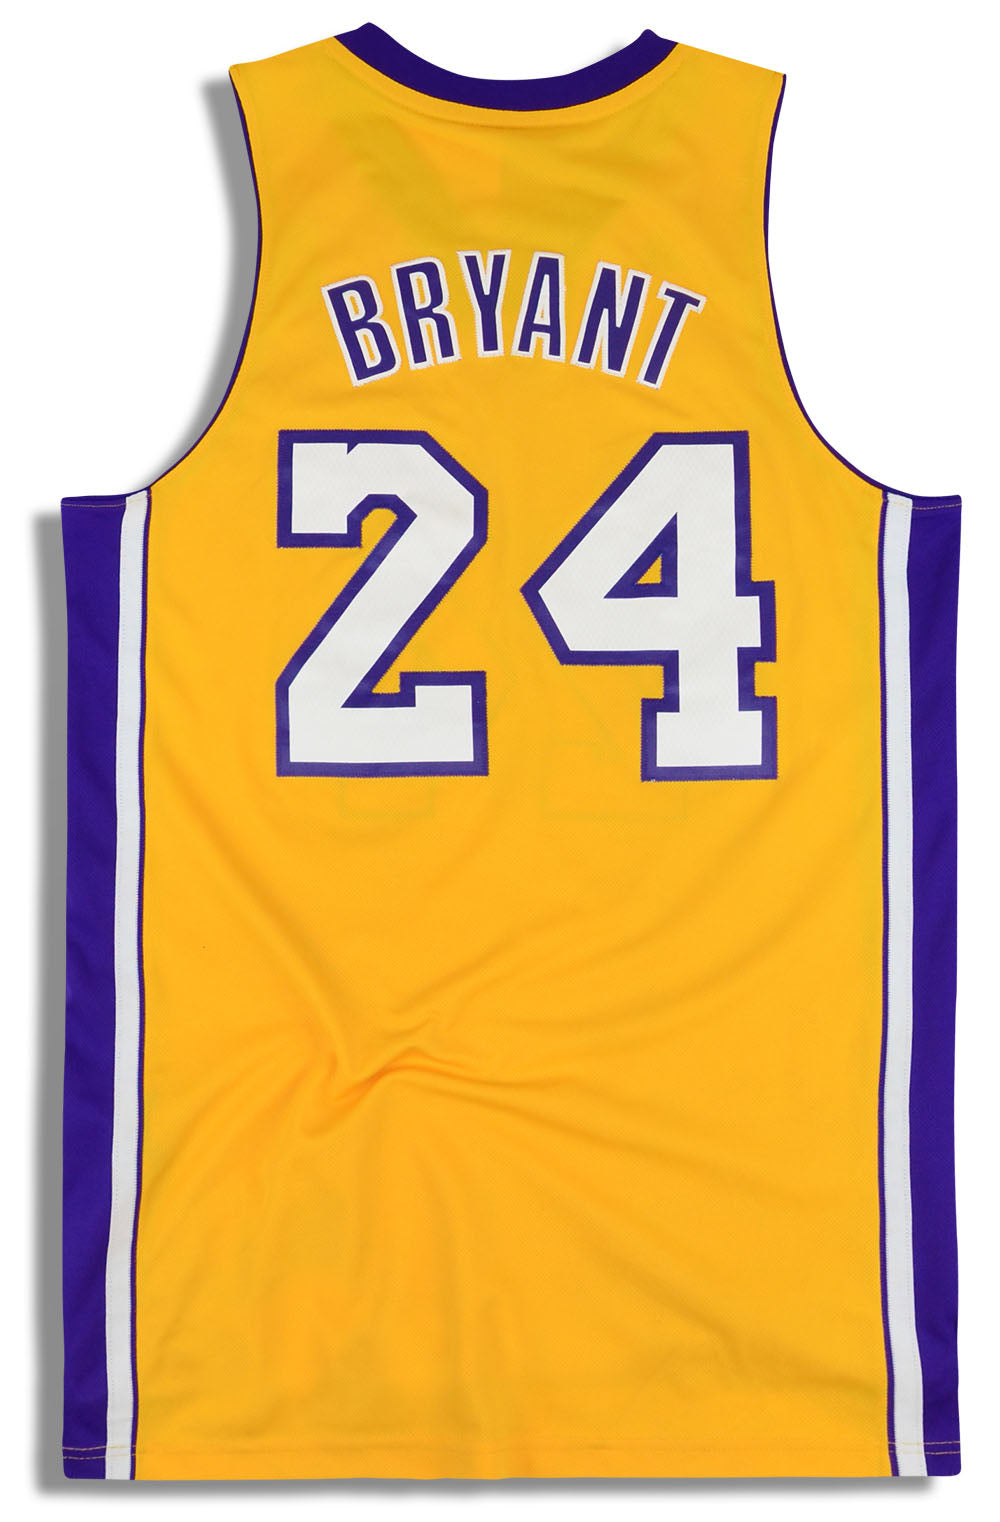 2010-14 LA LAKERS BRYANT #24 ADIDAS JERSEY (HOME) S - Classic American  Sports